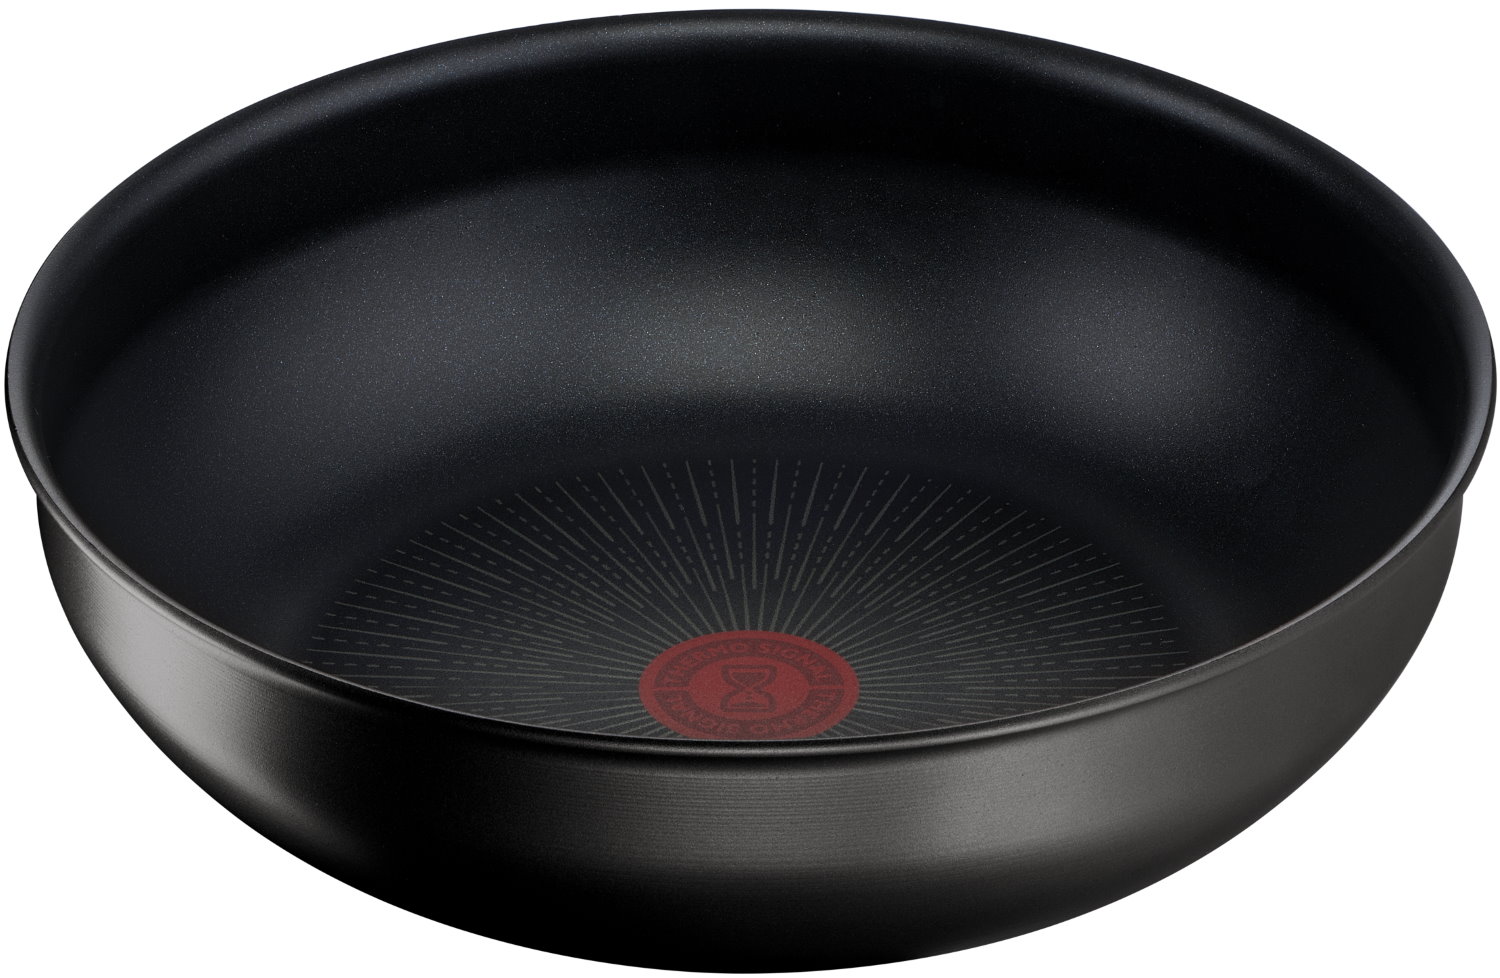 Tefal Ingenio XL Force Stackable Cookware Frypan Set